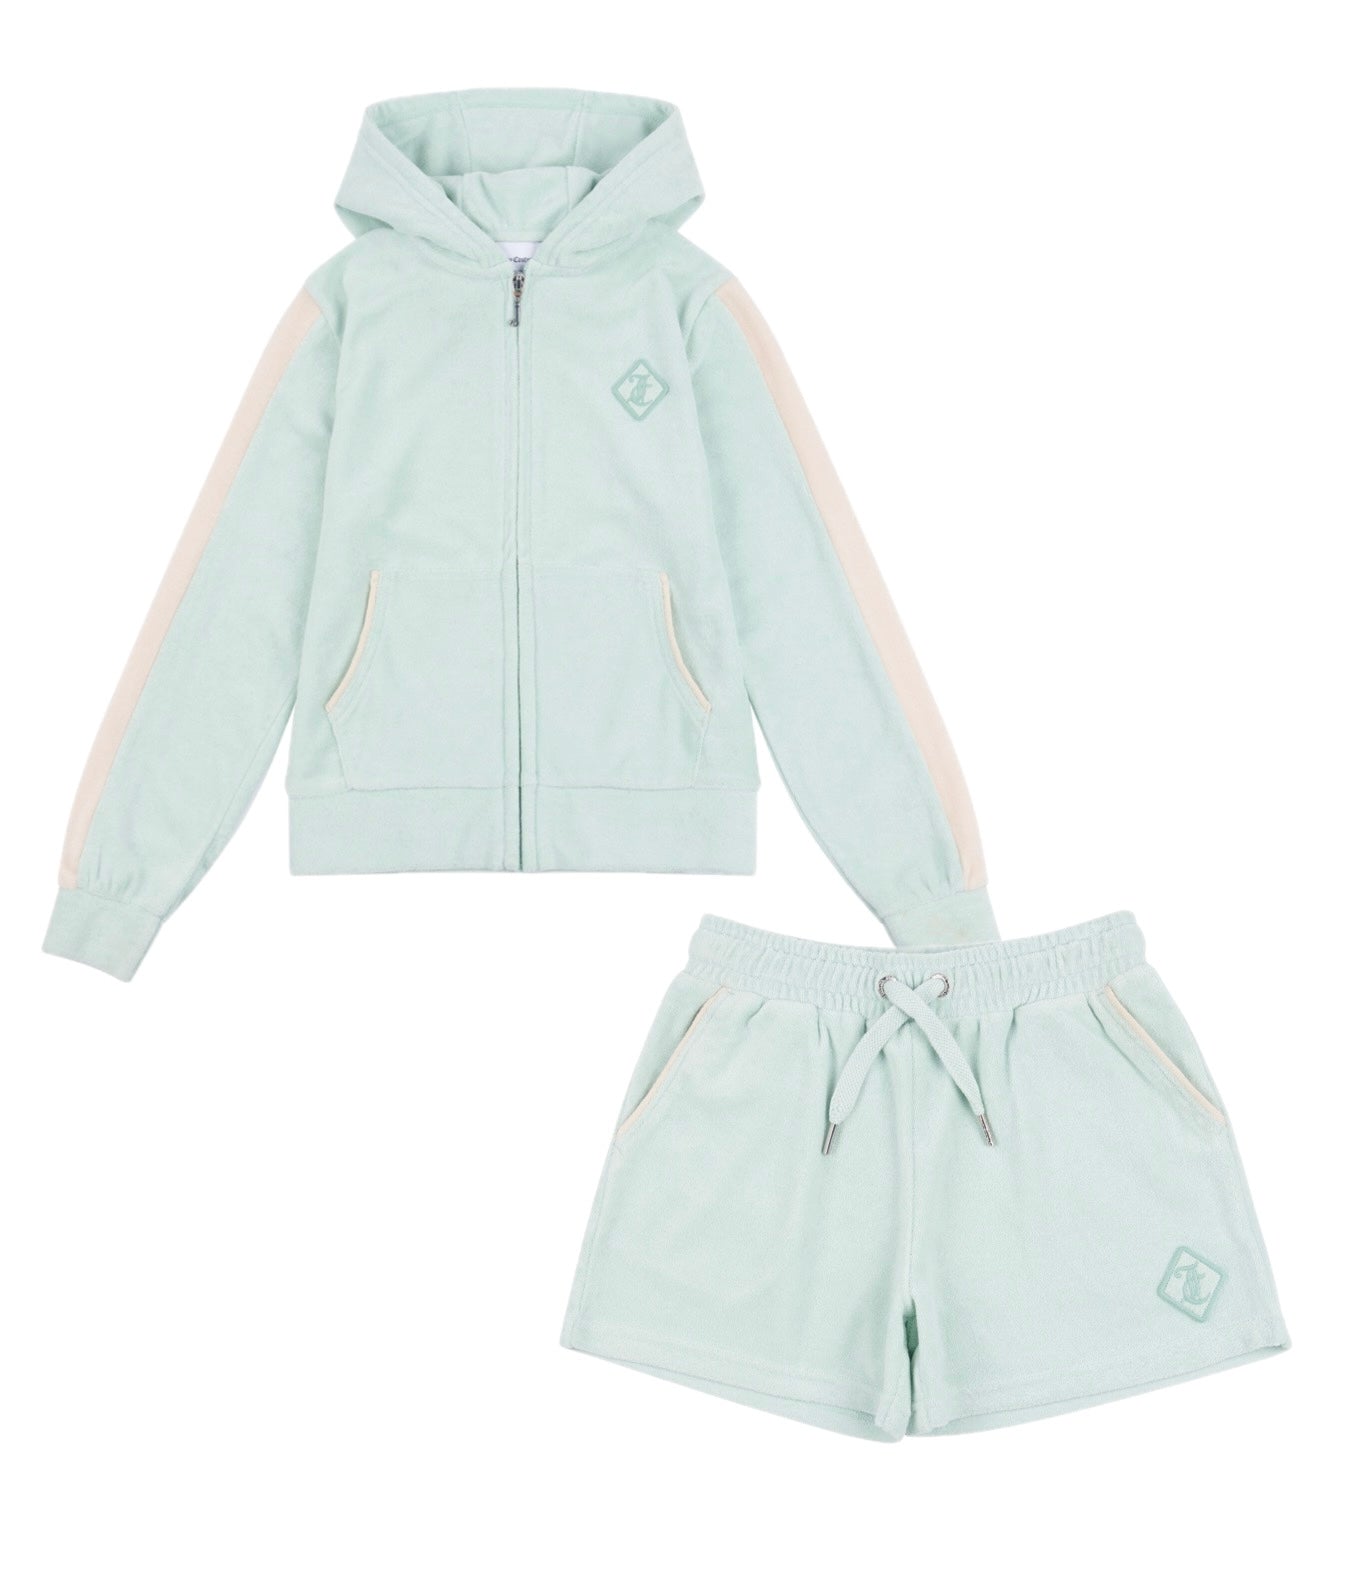 Juicy Couture Girls Surf Towelling Jacket & Shorts Set